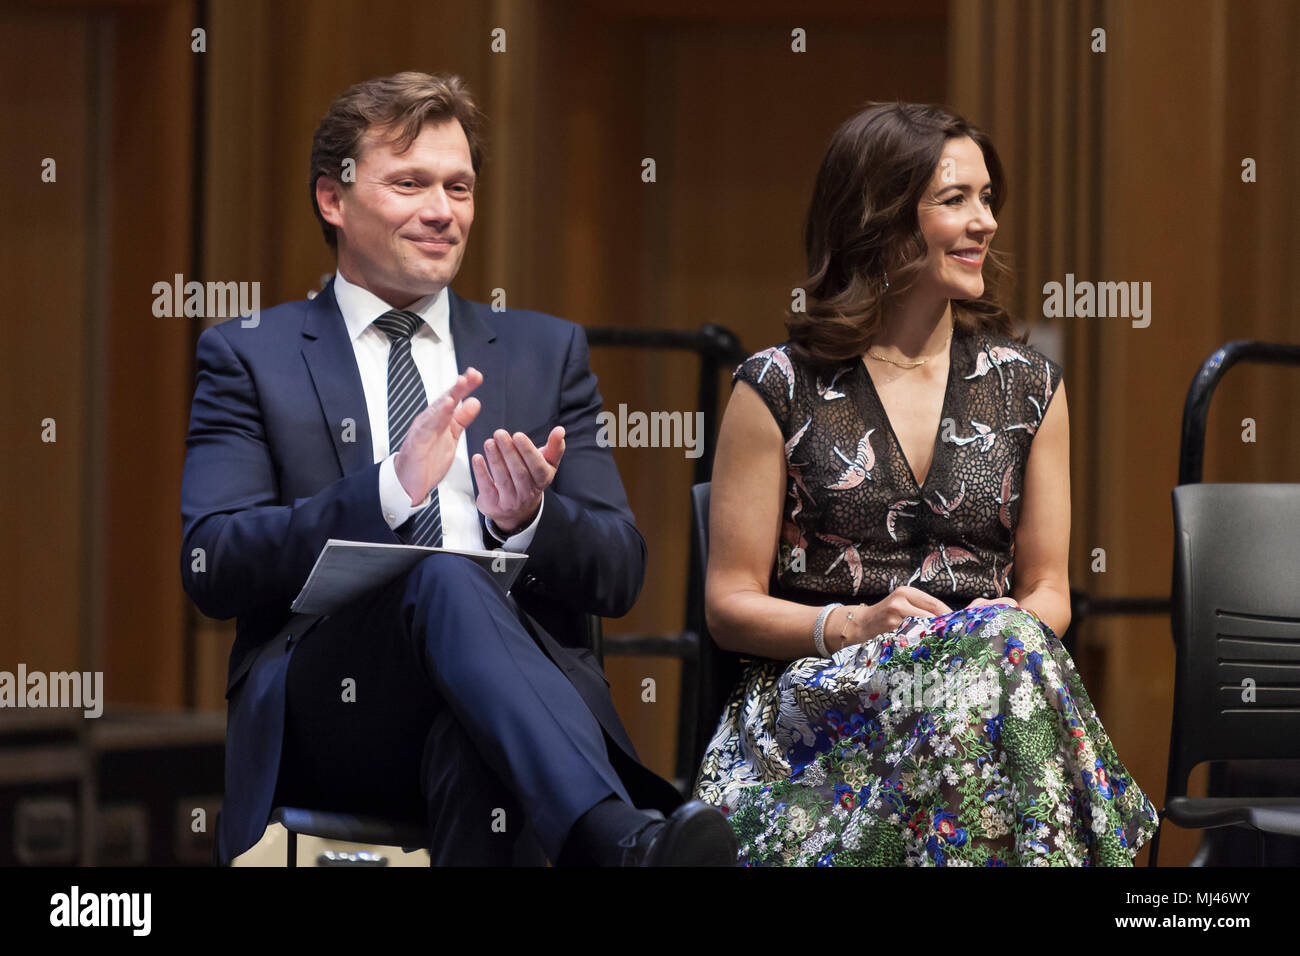 seattle-washington-crown-princess-mary-of-denmark-appears-with-denmarks-ambassador-to-the-united-states-lars-lose-left-during-the-grand-opening-celebration-of-the-nordic-museum-the-danish-embassy-is-launching-an-initiative-to-share-danish-culture-ideas-and-innovation-with-communities-around-the-us-the-landmark-museum-is-the-largest-in-the-united-states-to-honor-the-legacy-of-immigrants-from-the-five-nordic-countries-denmark-finland-iceland-norway-and-sweden-the-original-location-was-founded-in-1980-in-an-old-elementary-school-in-the-ballard-neighborhood-MJ46WY.jpg